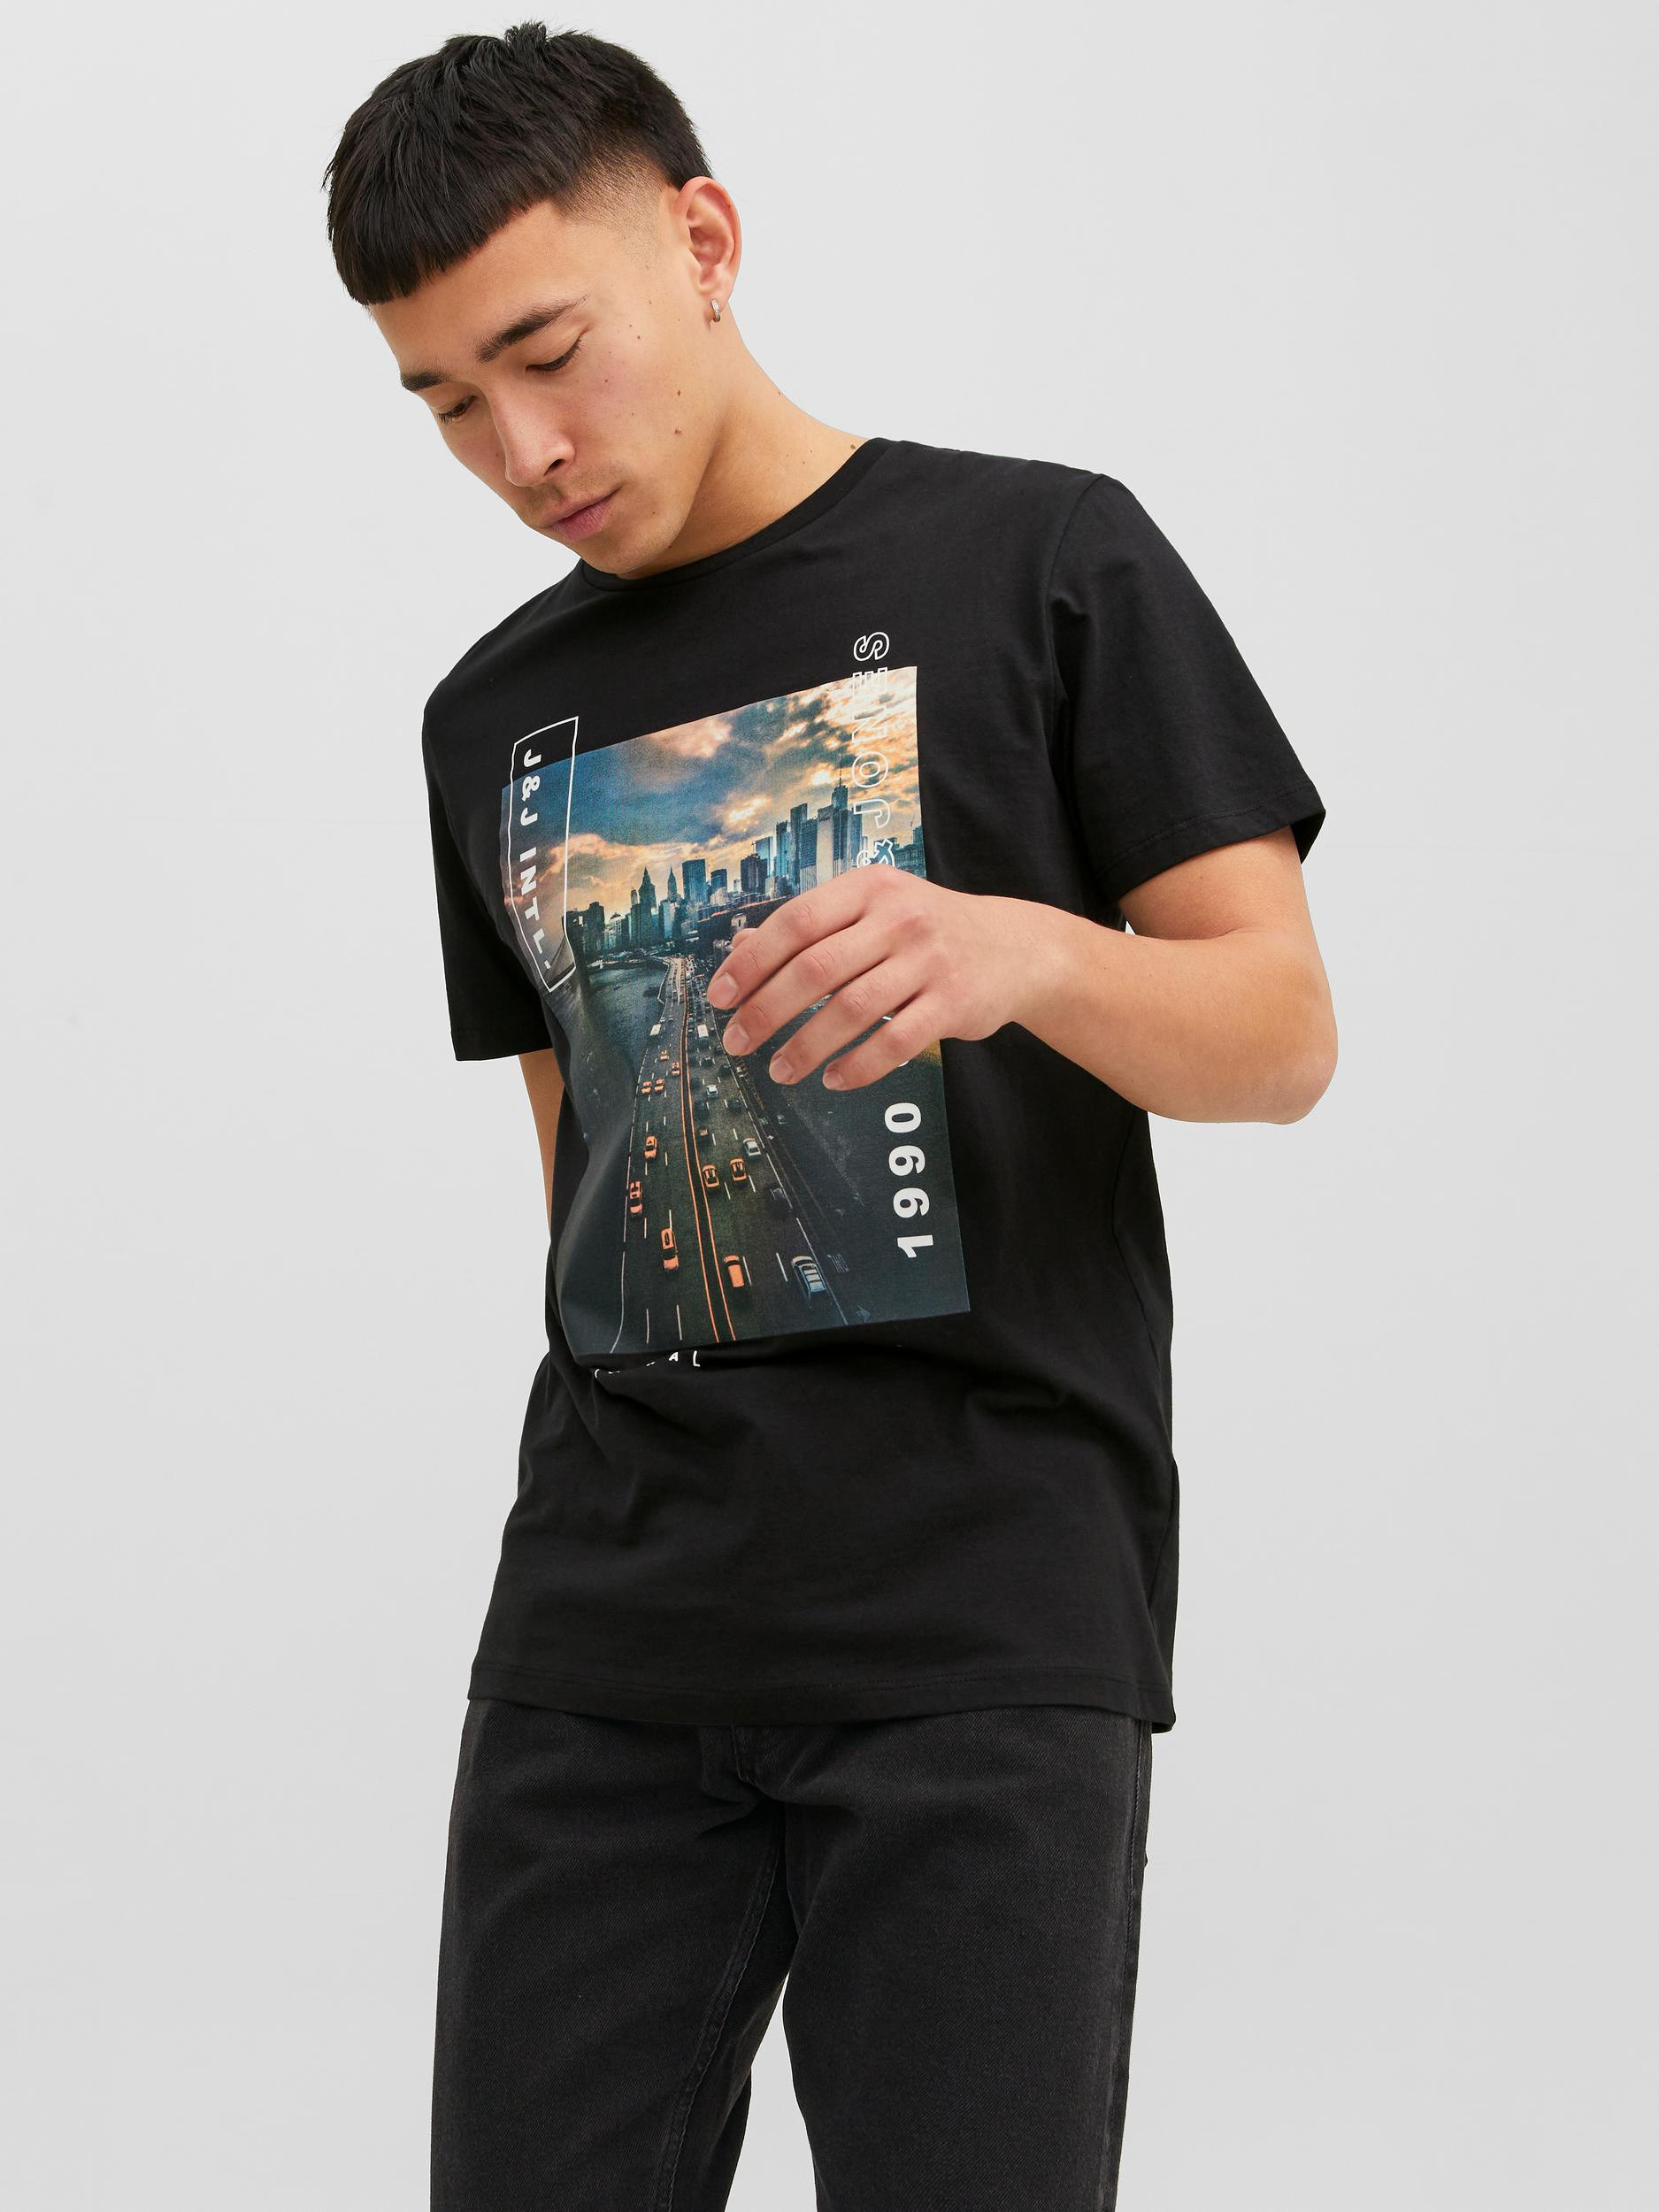 Jack & Jones -T-shirt in cotone con stampa, Nero, large image number 3